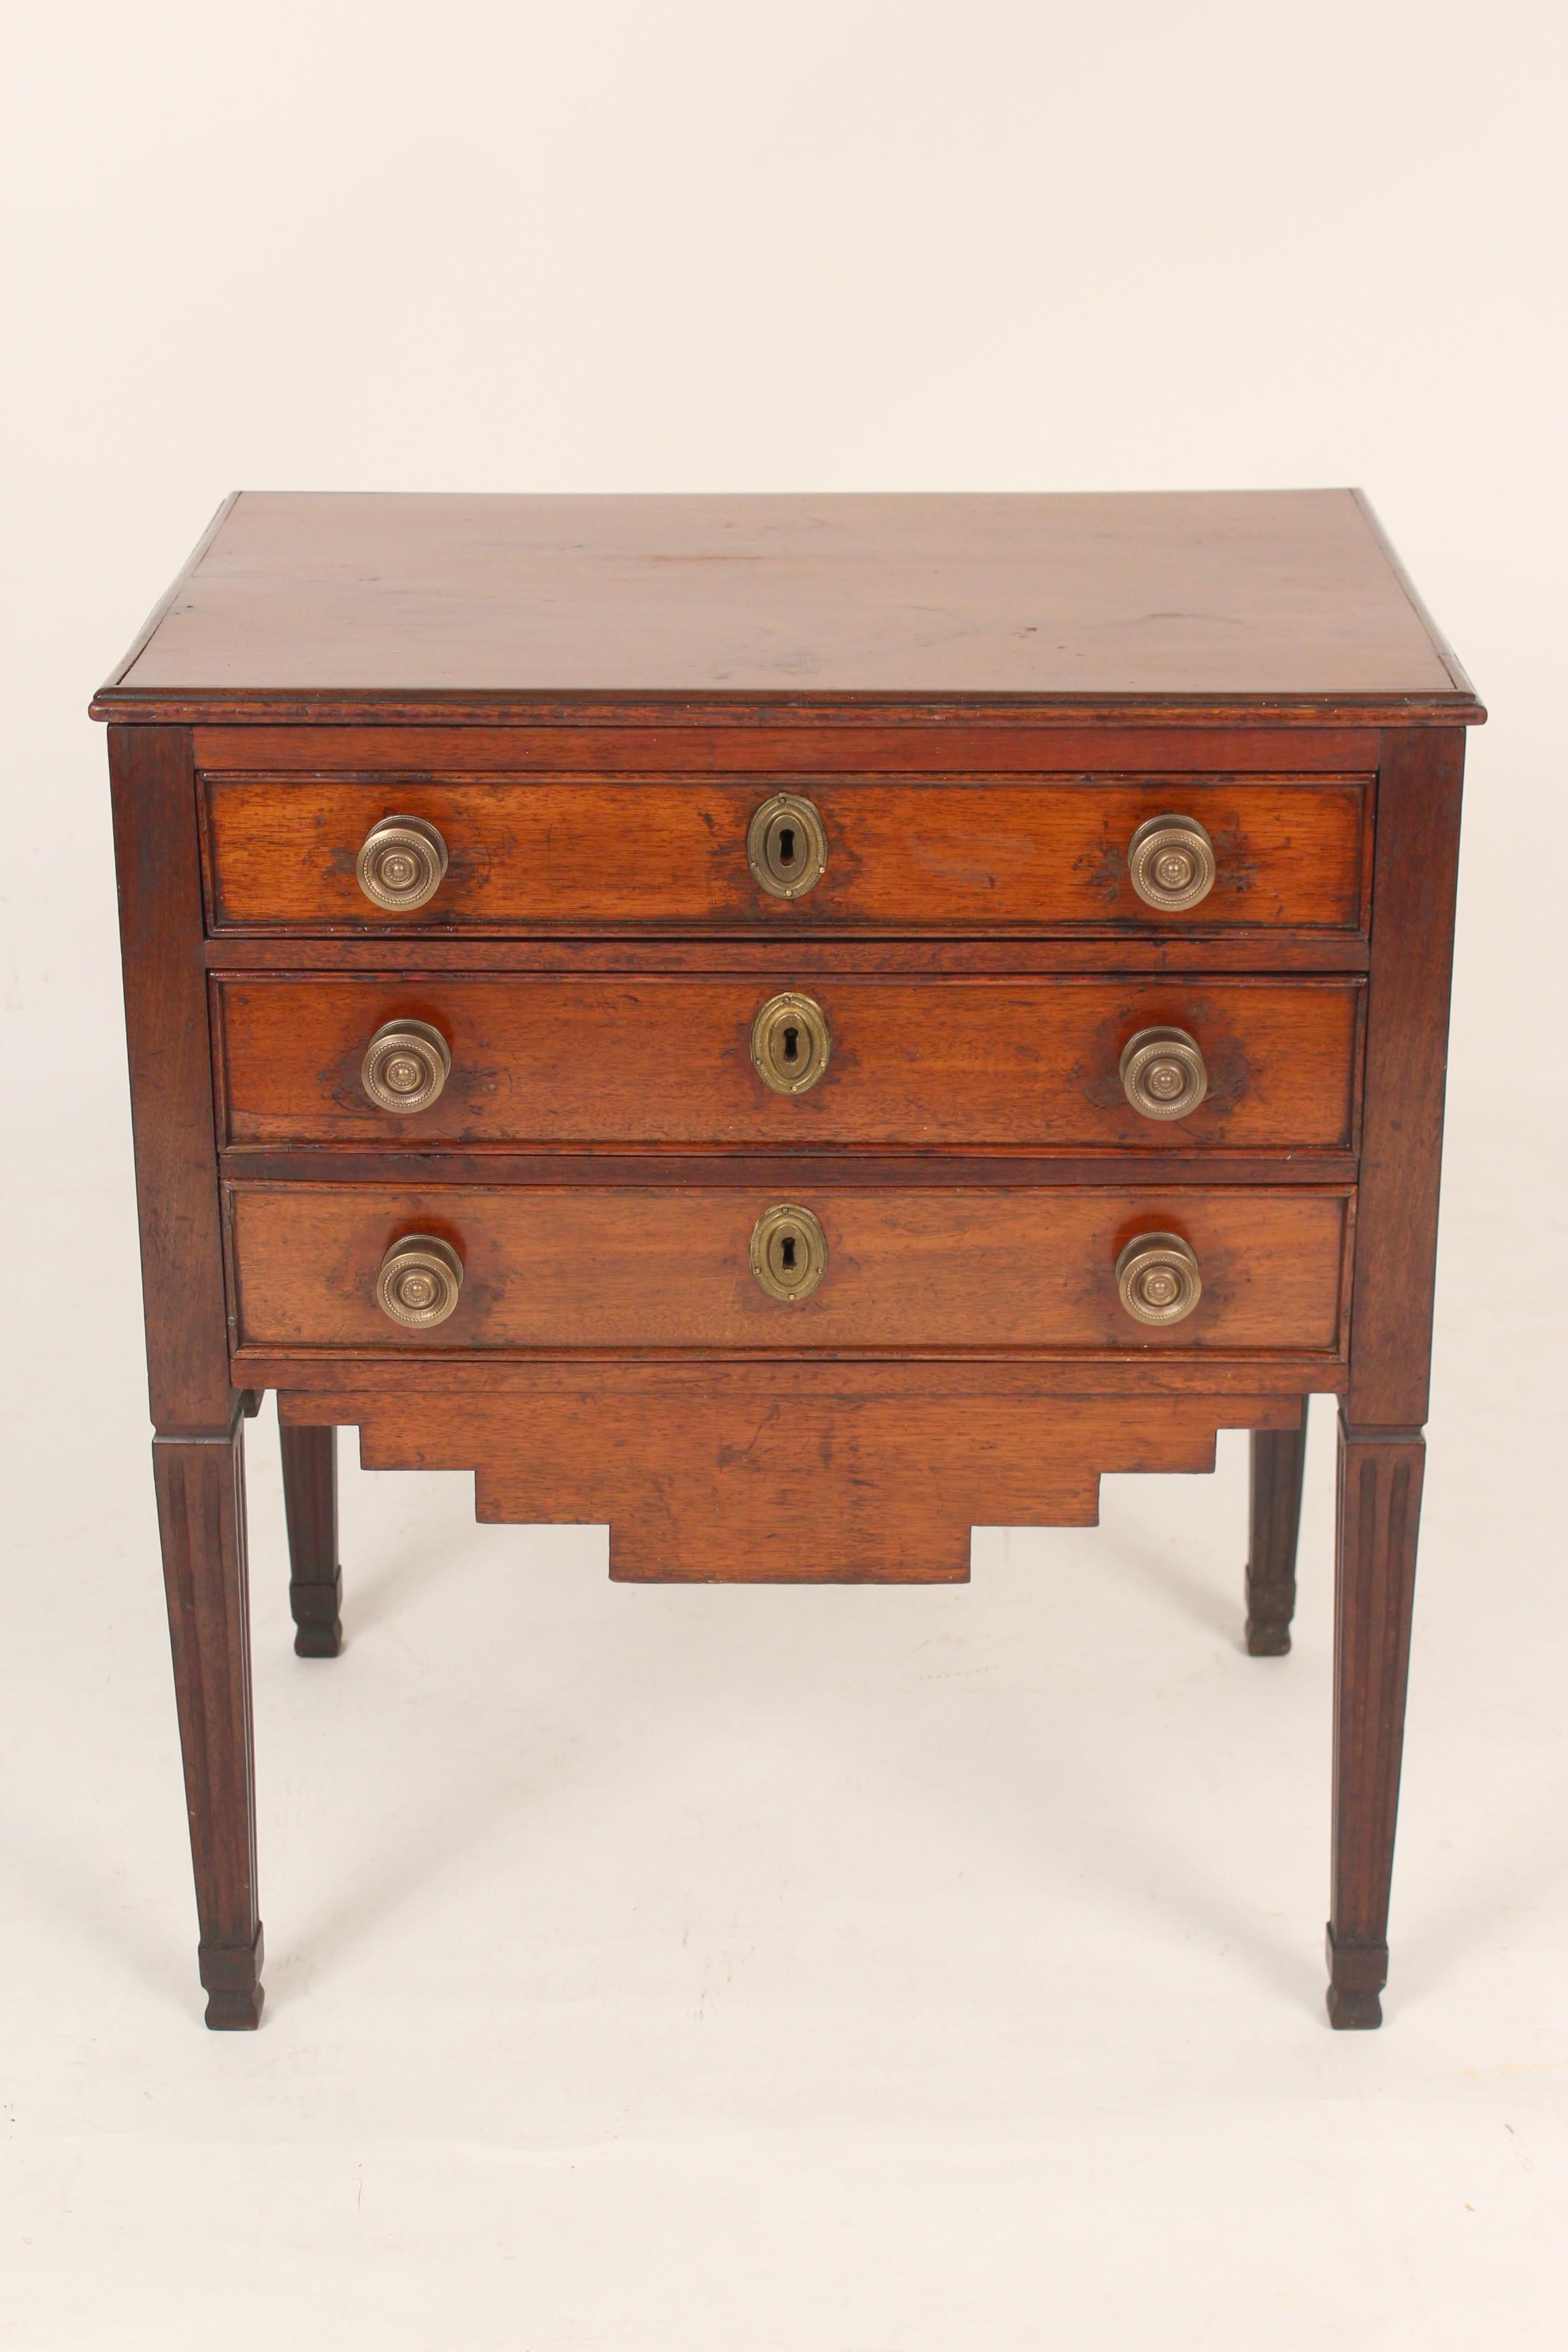 Antique Louis XVI style mahogany occasional commode, 19th century. With nice antique patina, square tapered fluted legs, hand dove tailed drawer construction and the back is finished.